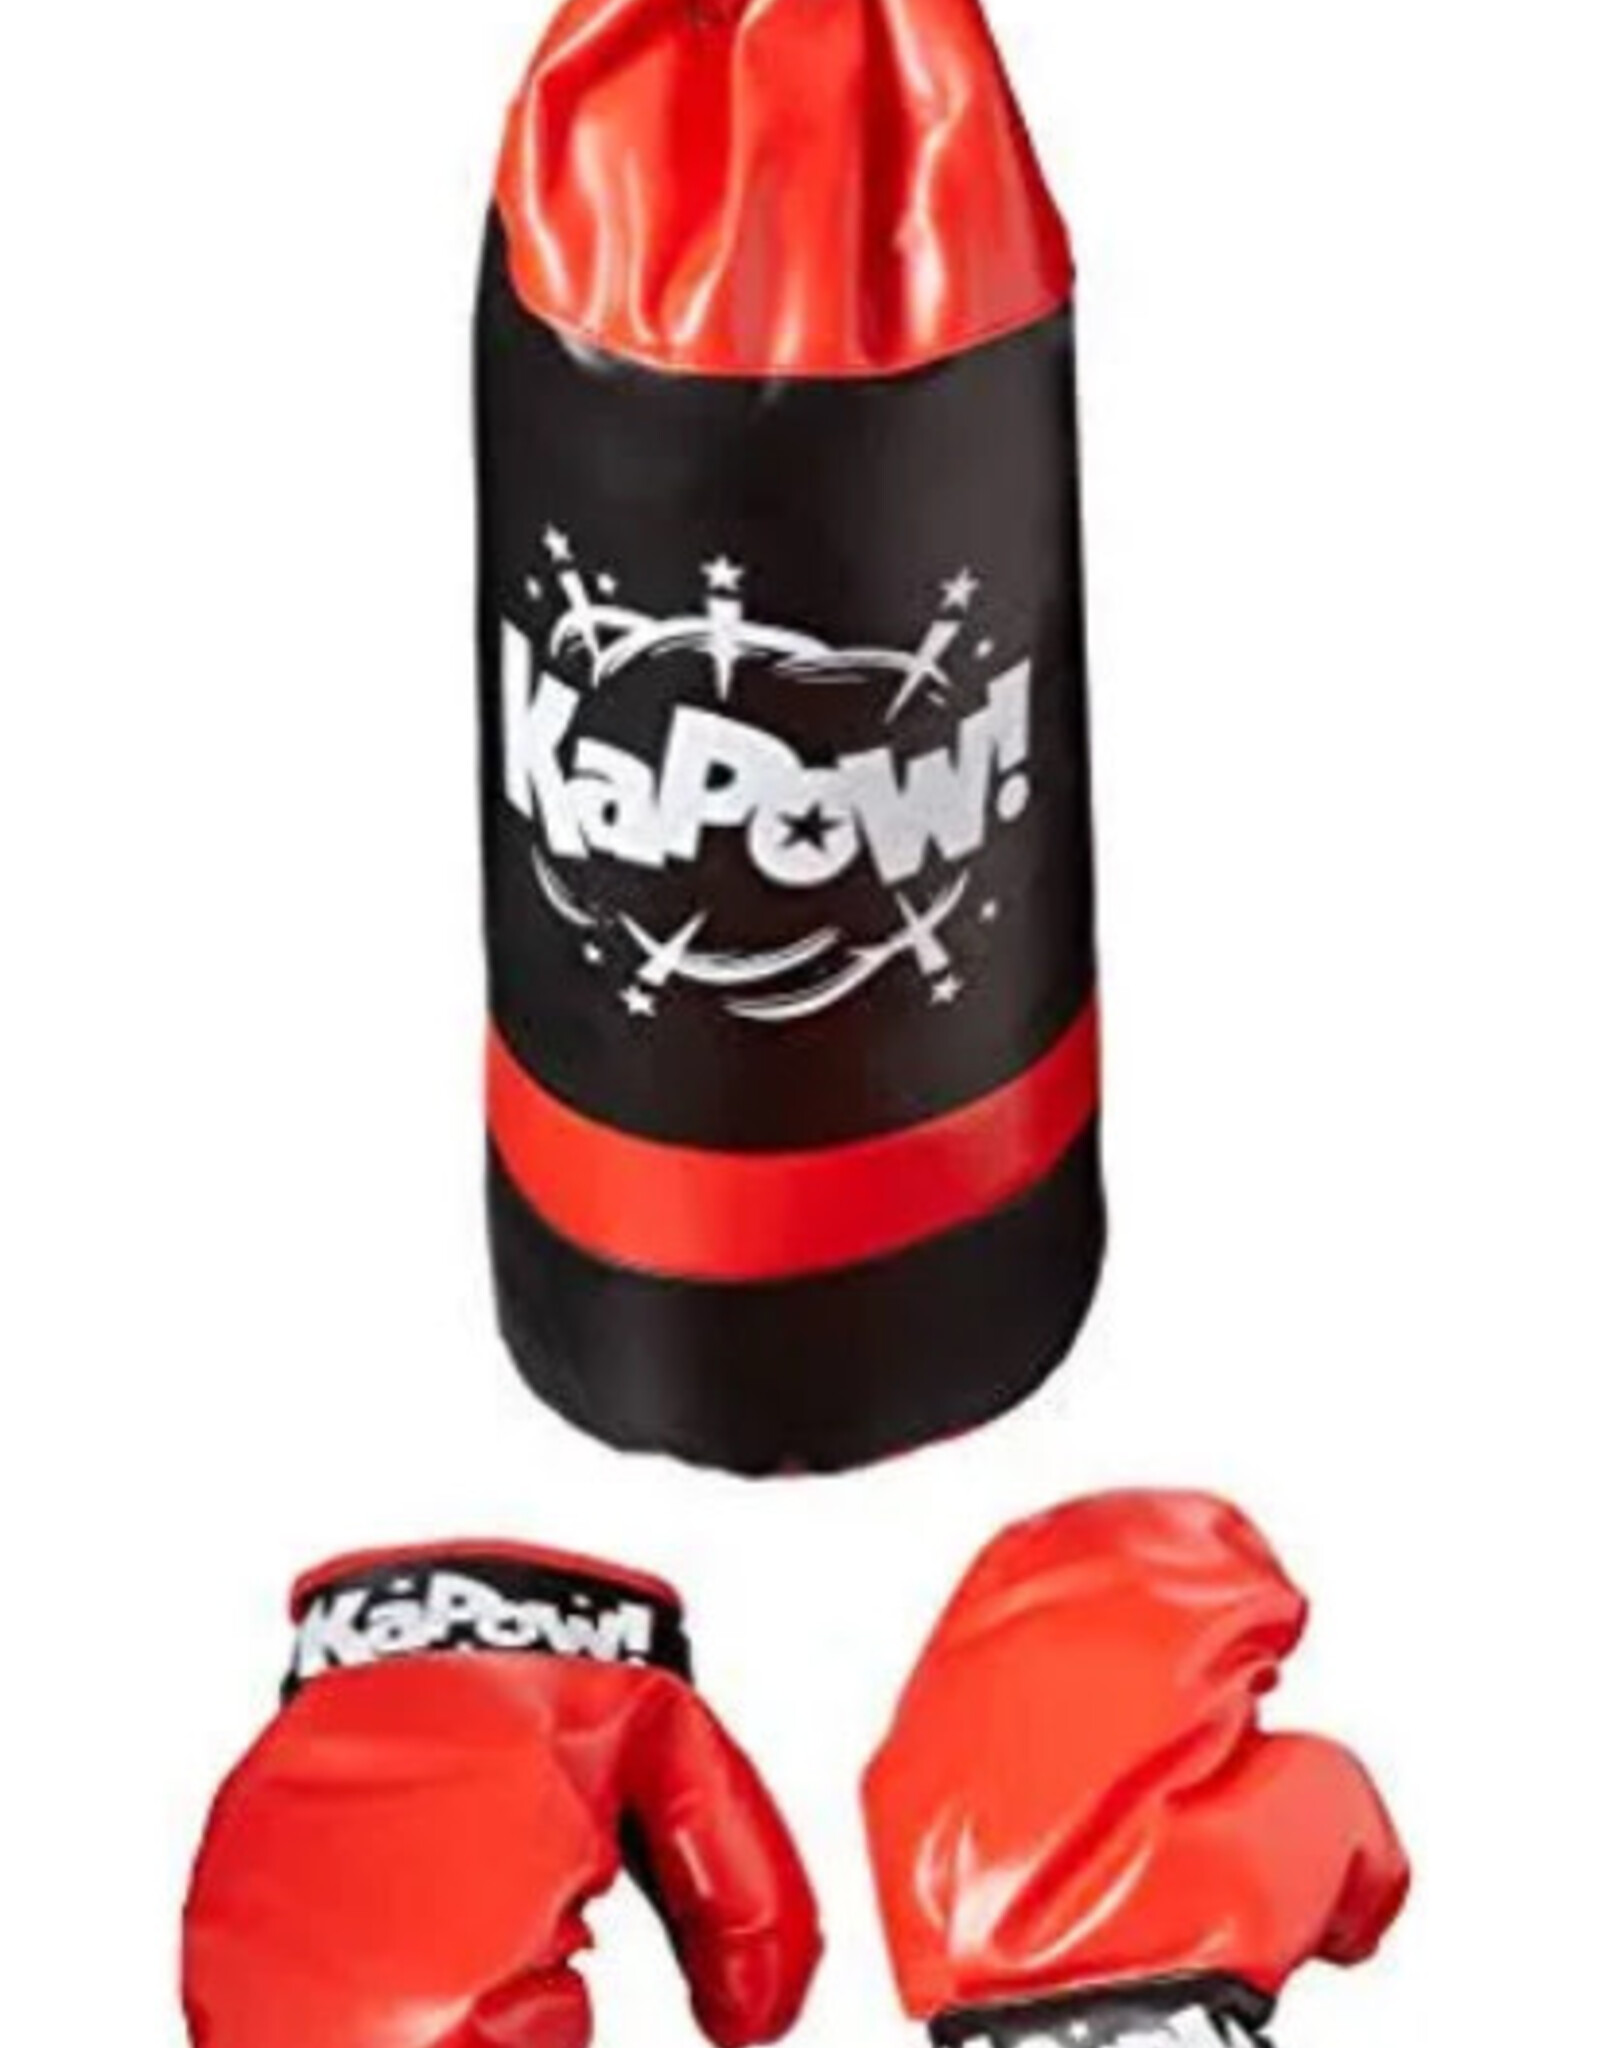 Schylling Punching Bag and Glove Set